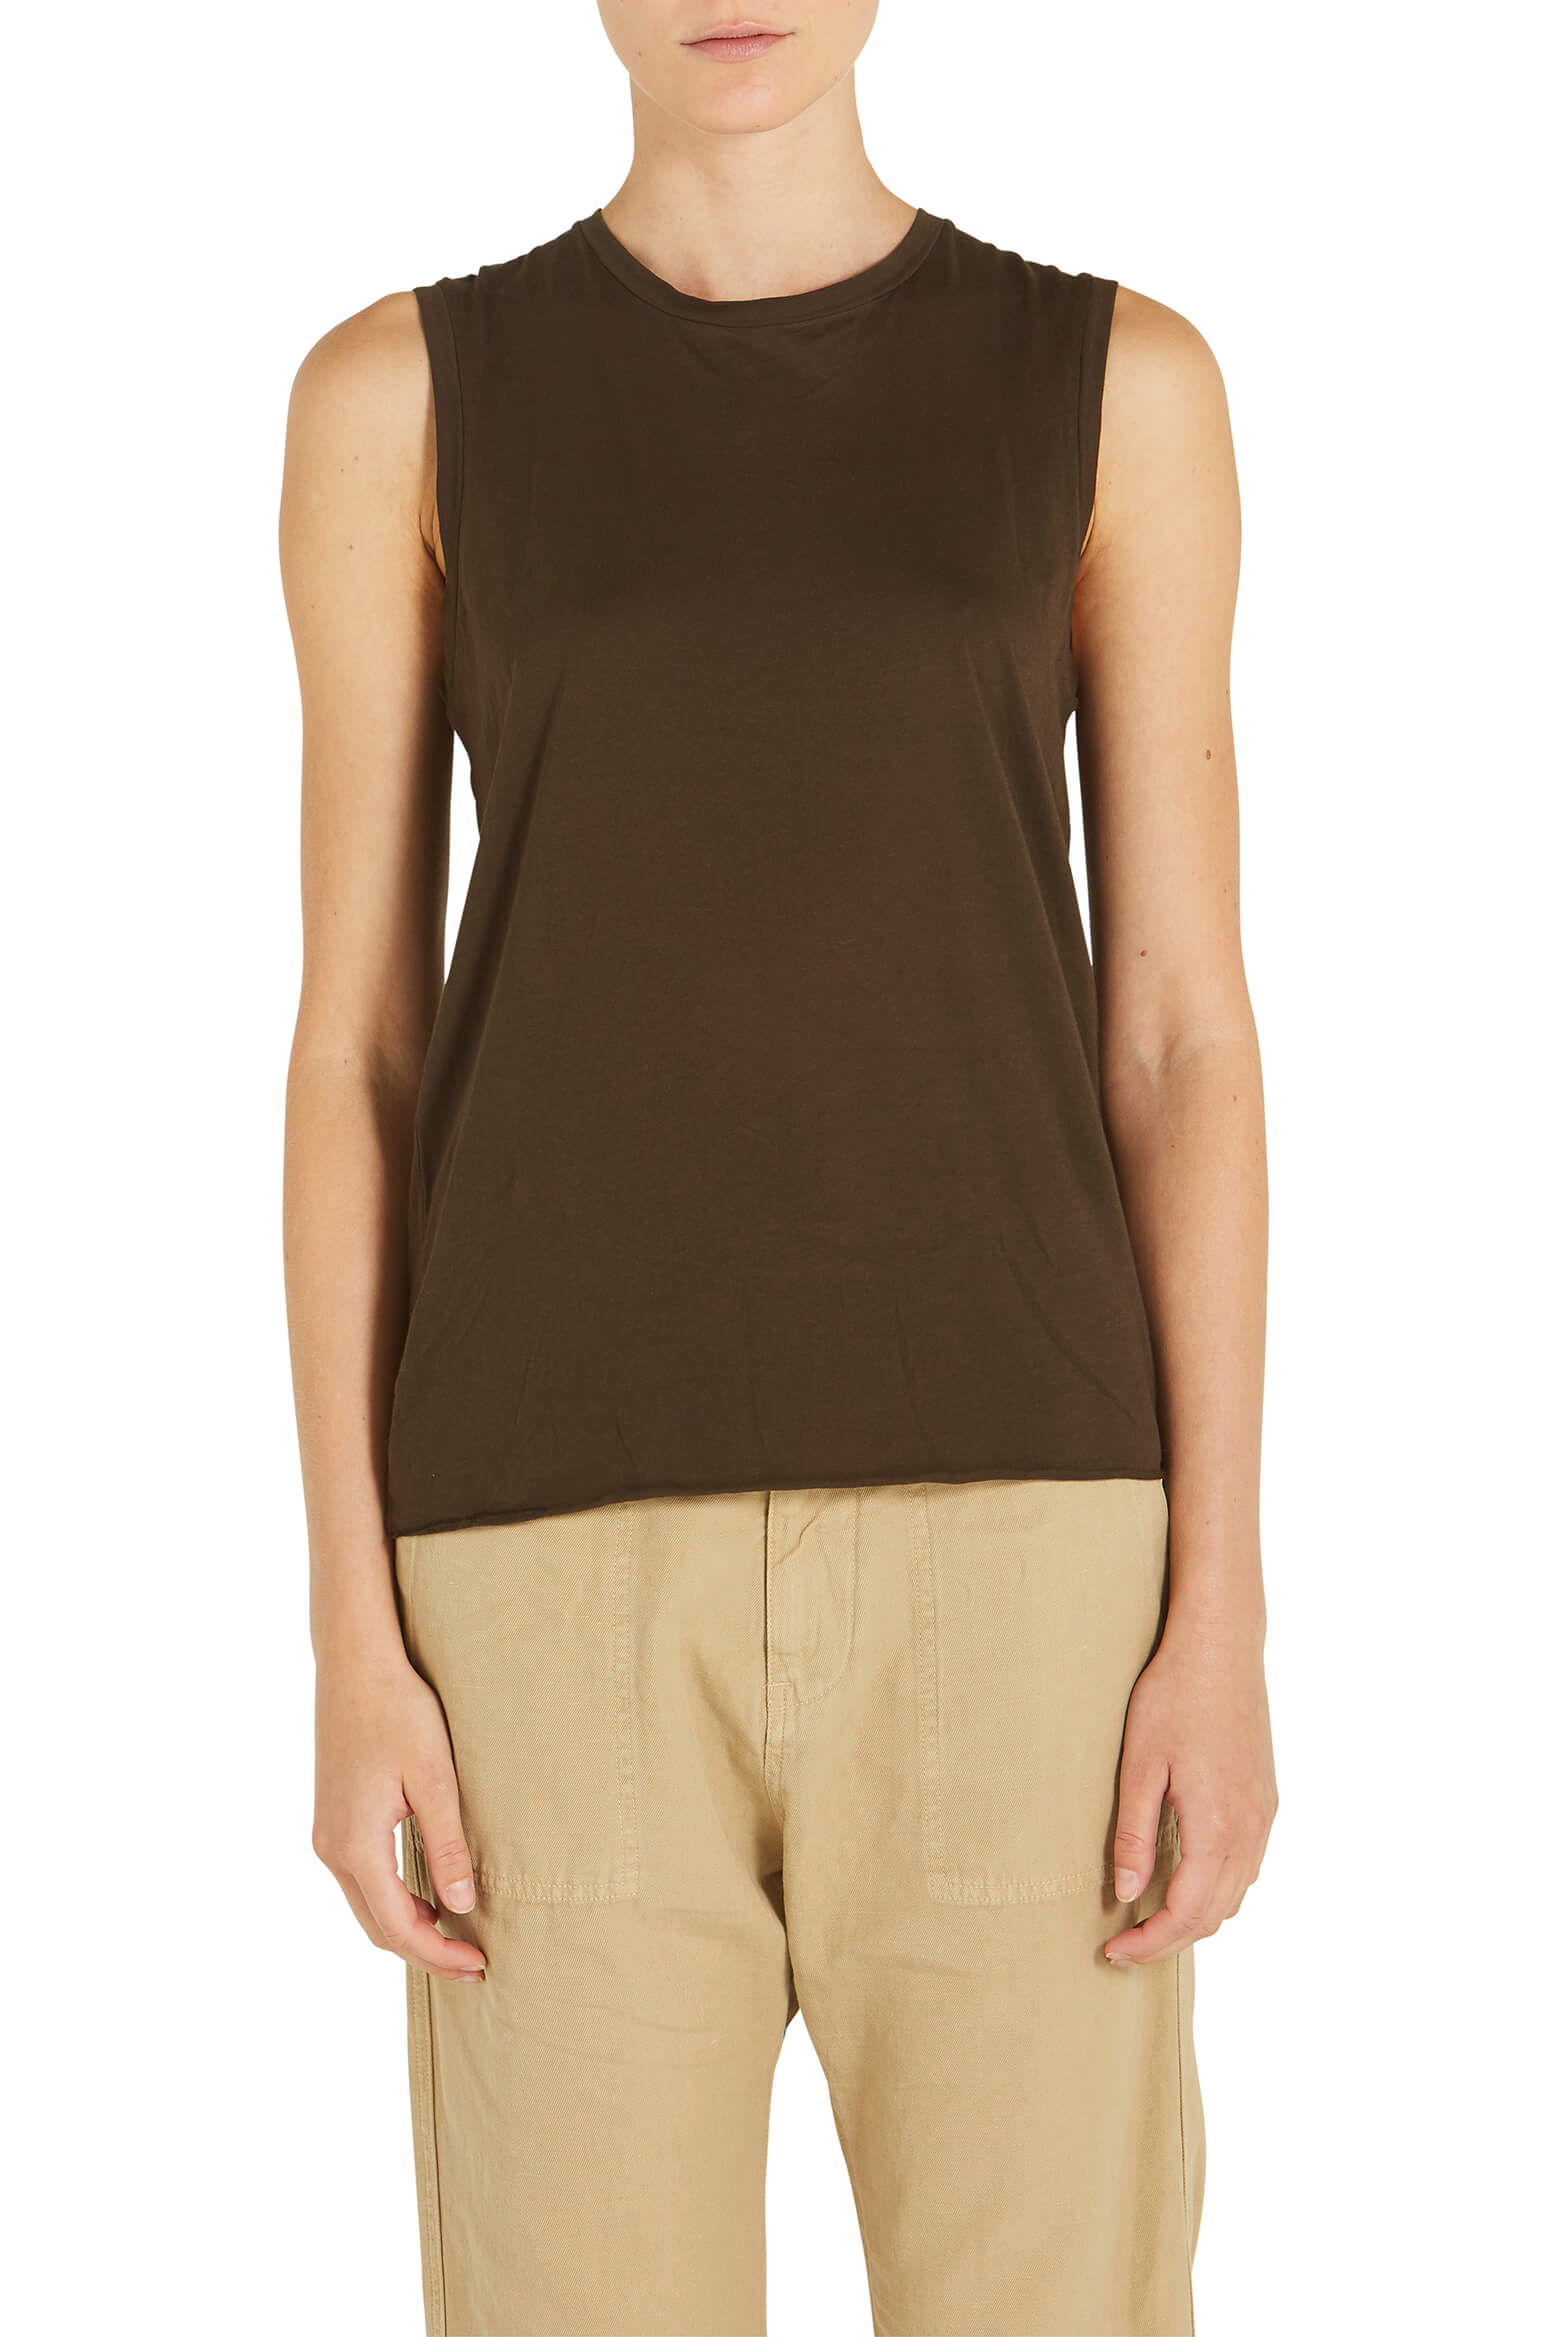 Nili Lotan Muscle Tee in Mocha from The New Trend